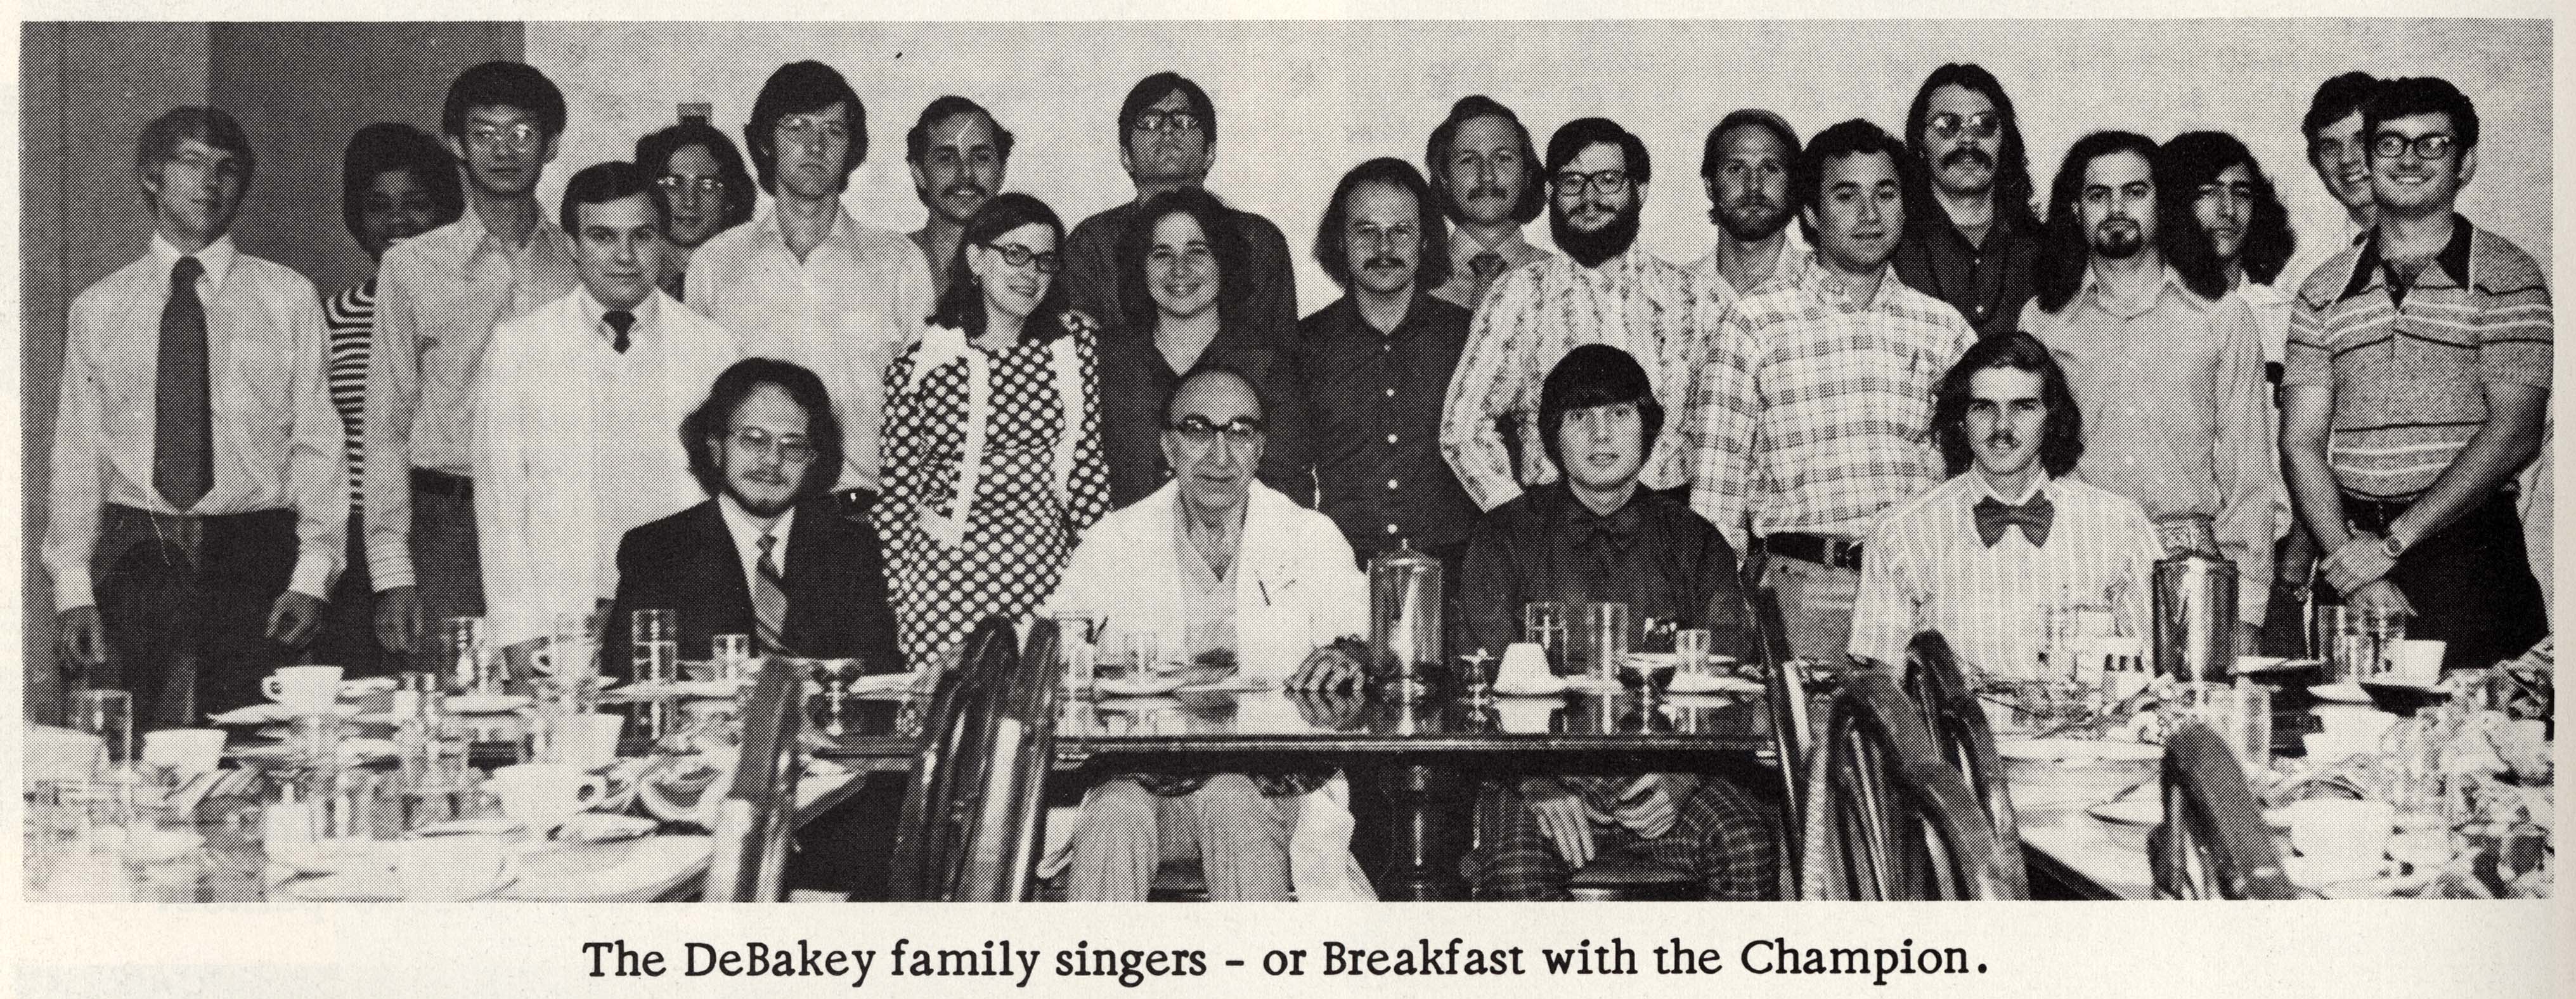 Dr. DeBakey joins students for breakfast in 1974. Photo courtesy Baylor College of Medicine Archives.